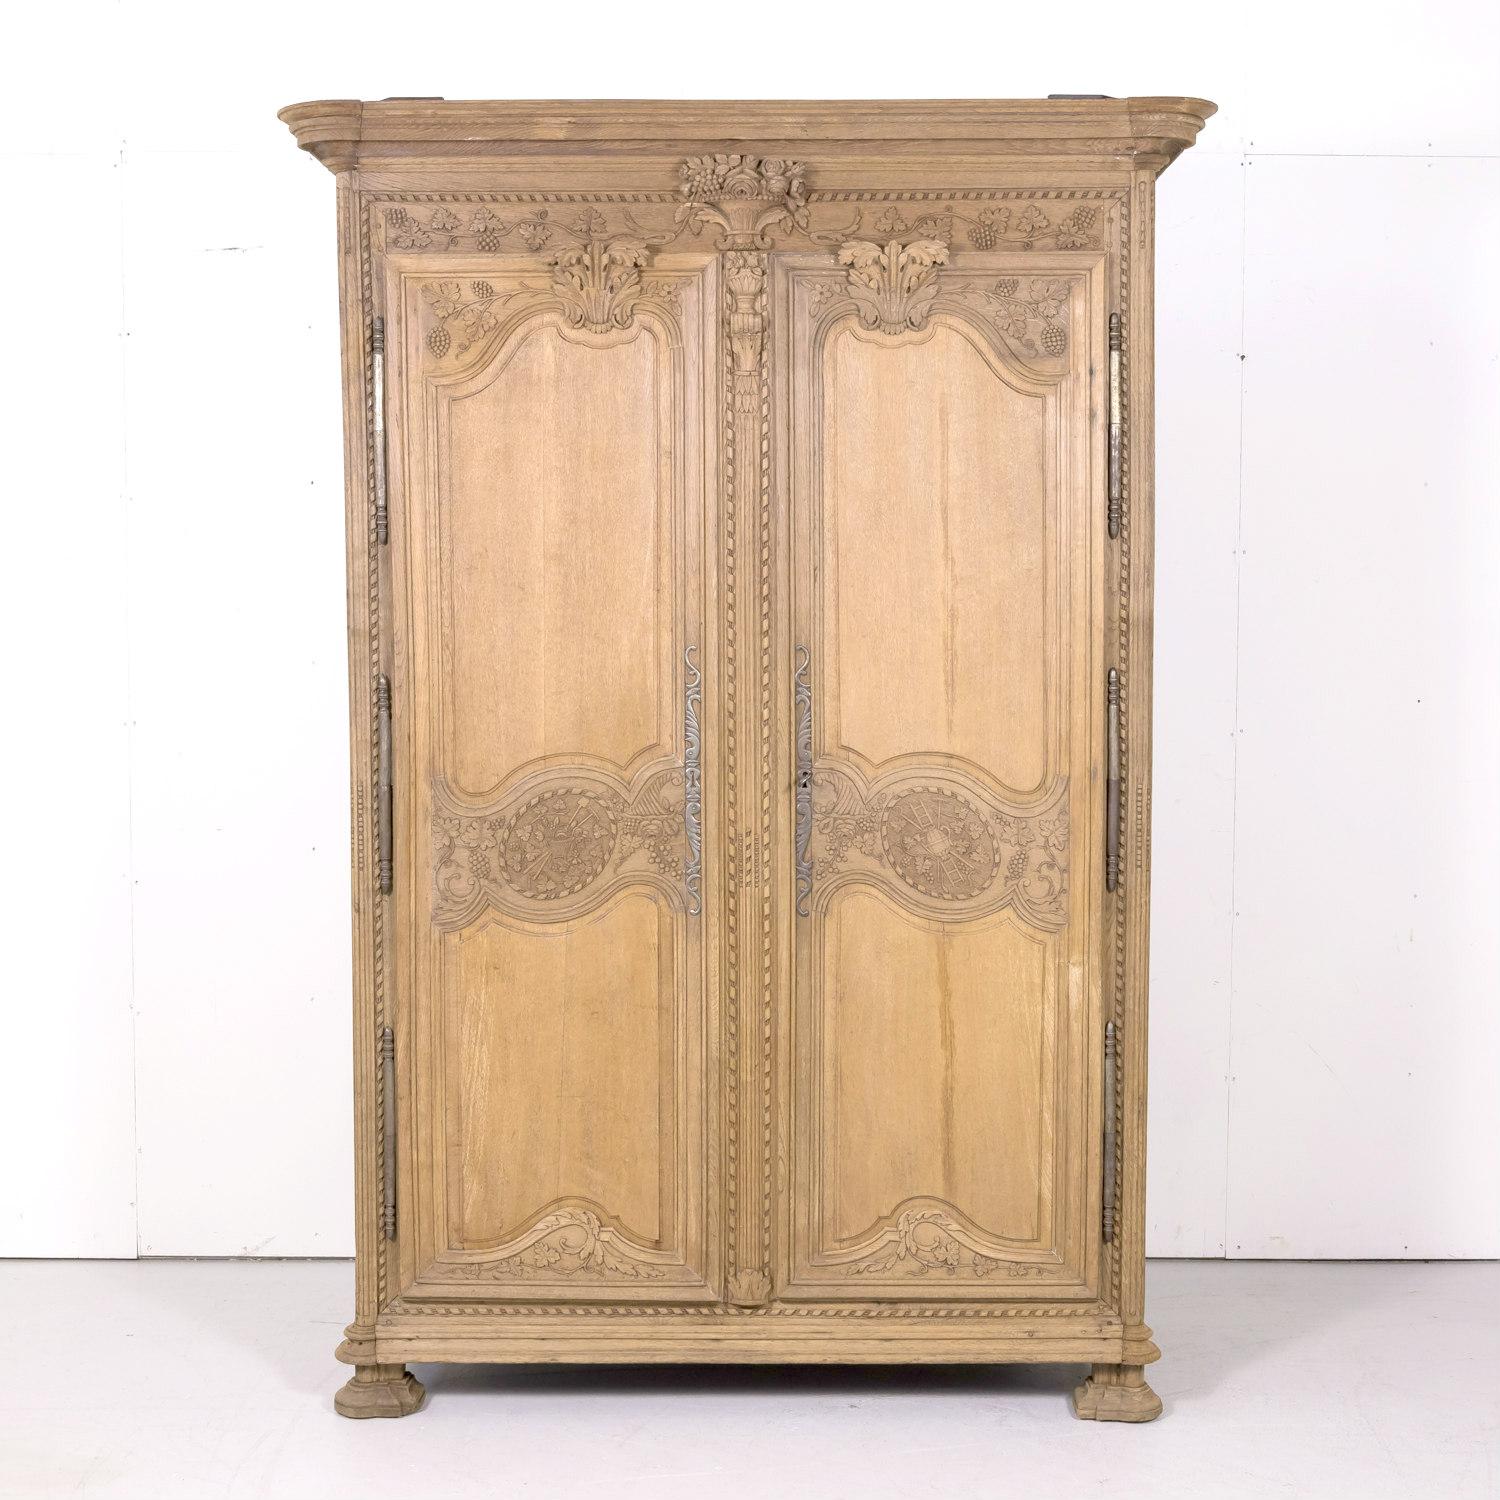 Early 19th century country French Louis XIV style bleached armoire de marriage or wedding armoire, circa 1810s. Handcrafted of old growth French oak in the Normandy region, this intricately carved wedding or marriage armoire features symbolic